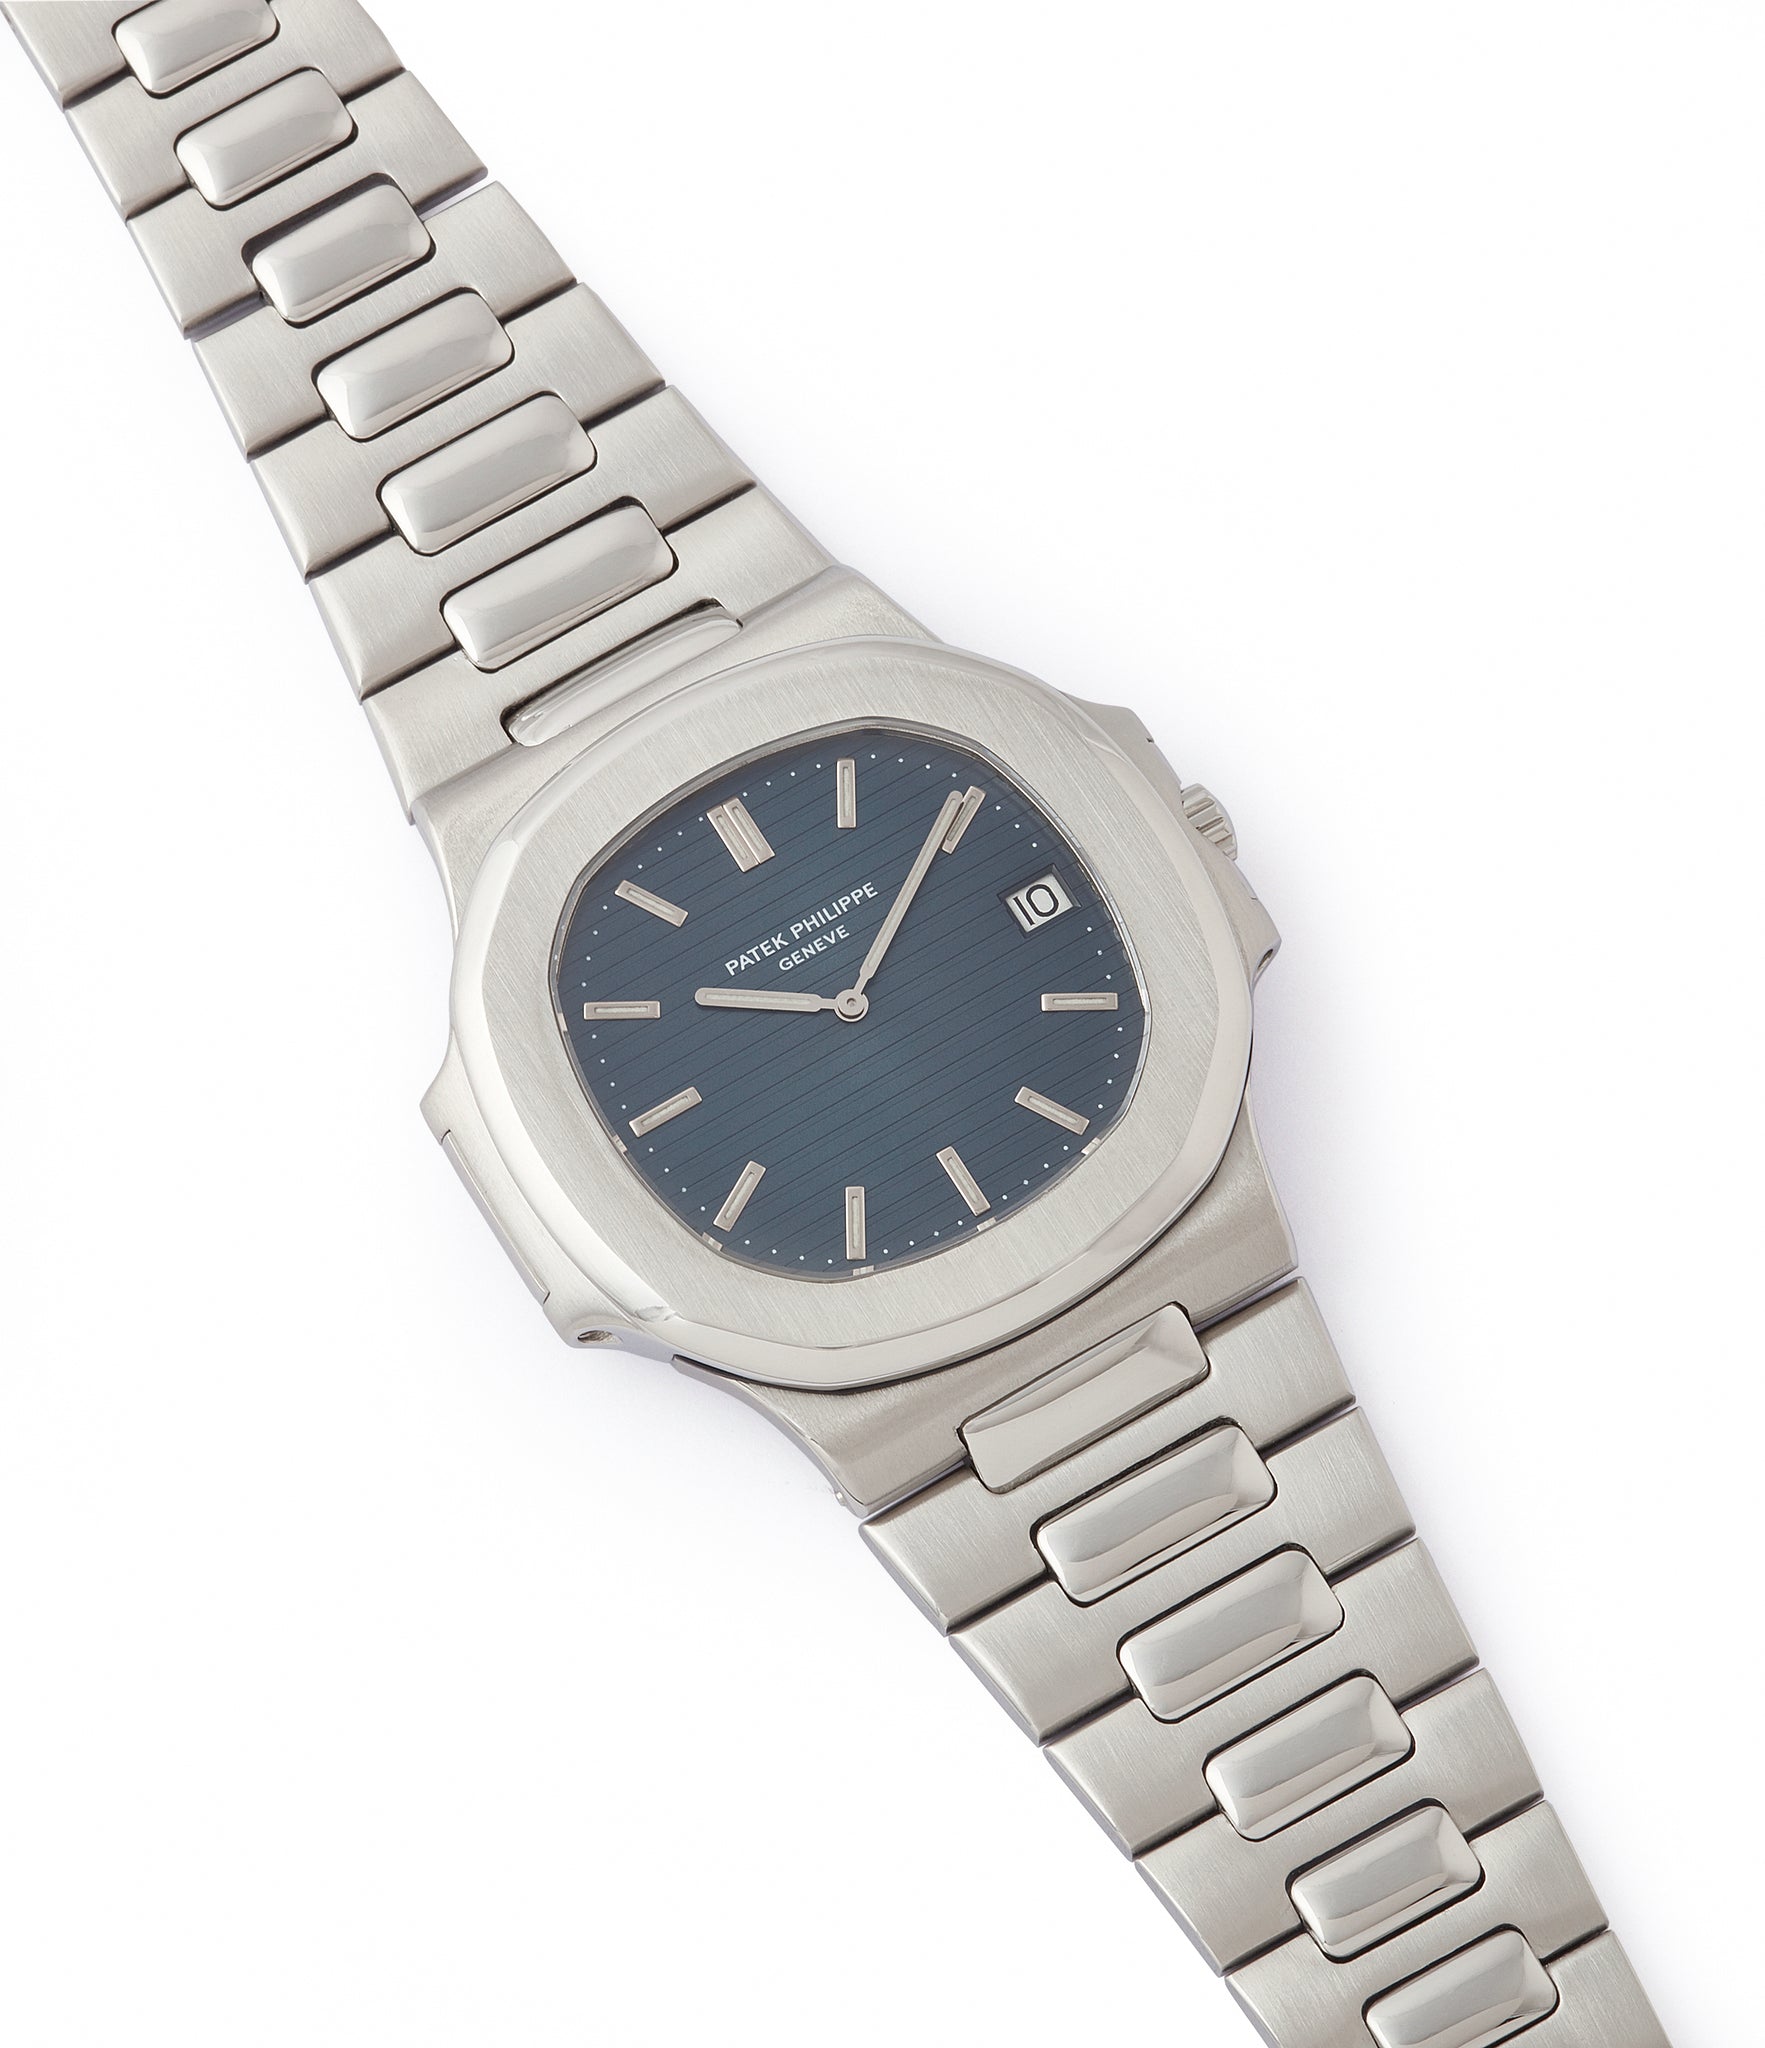 find Patek Philippe Nautilus 3700/001A steel sport watch full set for sale online at A Collected Man London UK specialist of rare vintage watches